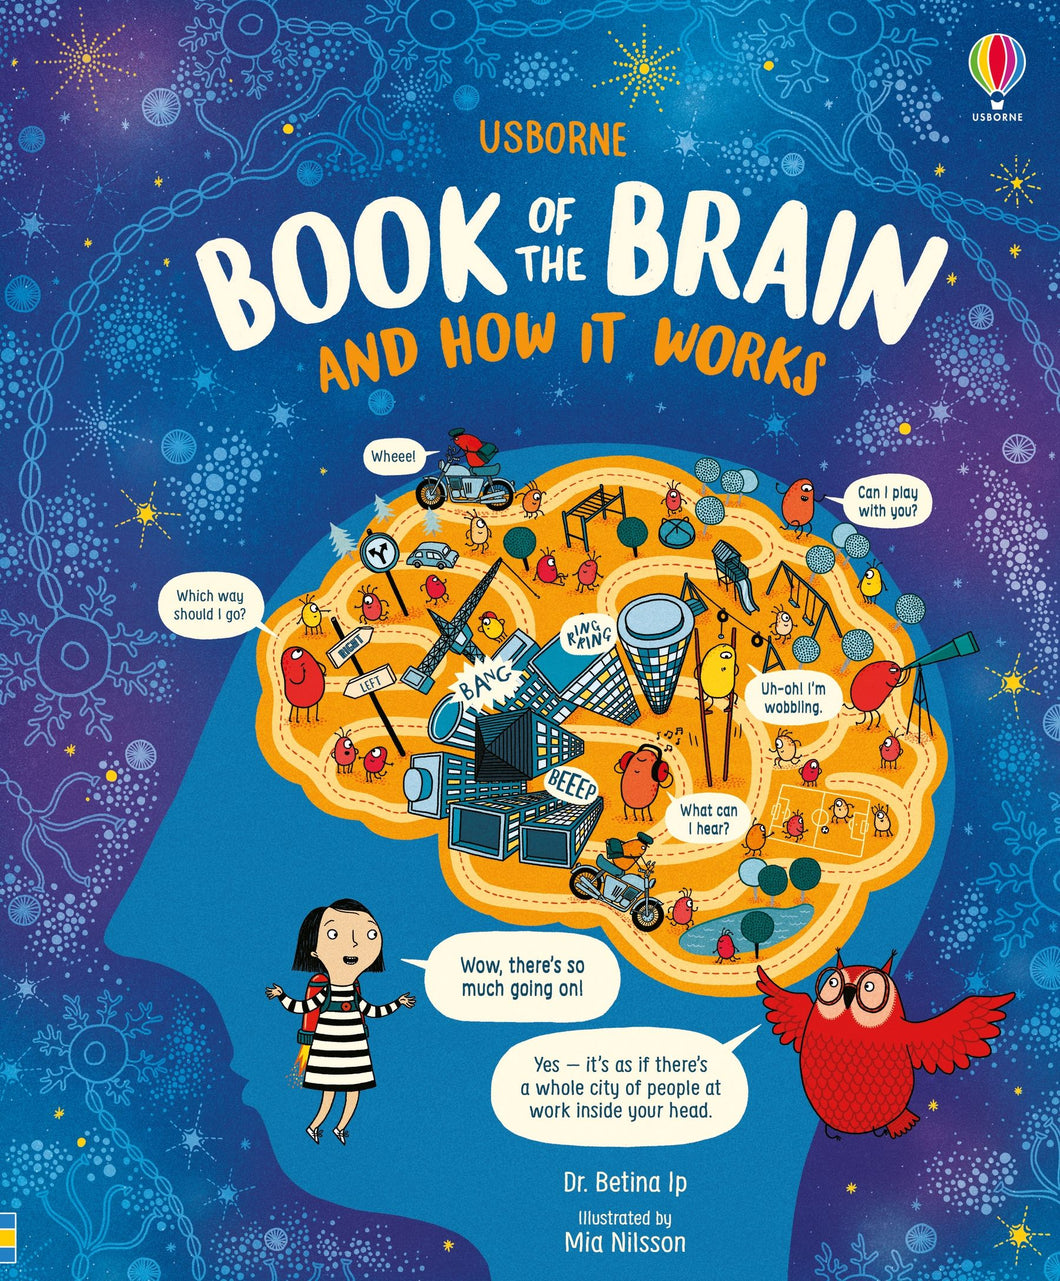 Book cover is blue with illustrations of neurons in a lighter blue, and a yellow brain in the cente with lots of activity inside. On the outside, a light-skinned girl in a black and white dress is talking to a red owl.